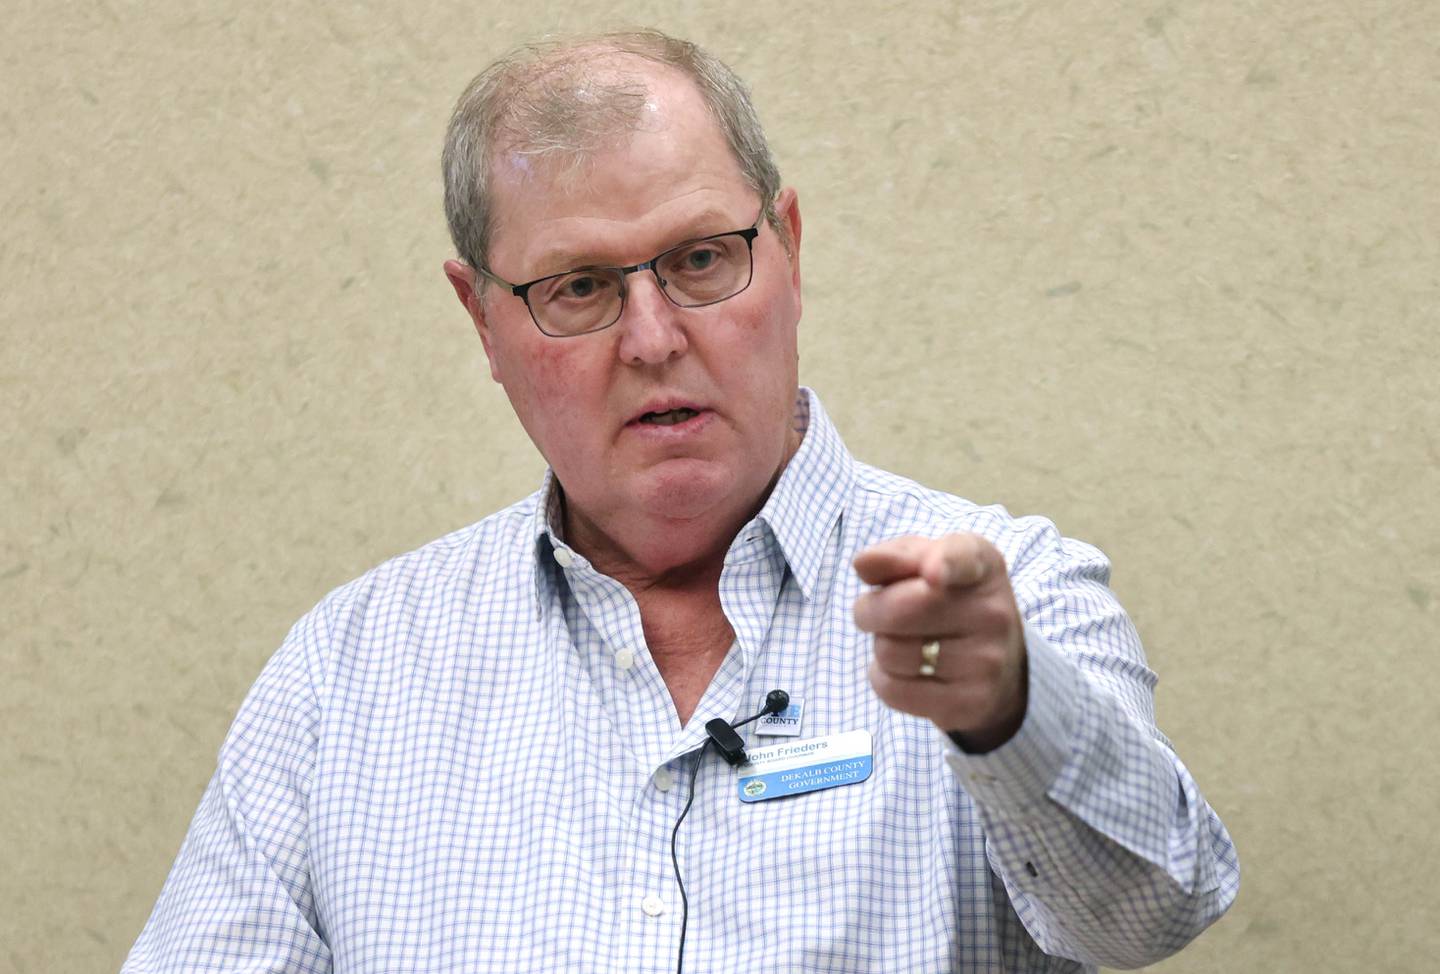 DeKalb County Board Chairman John Frieders calls on members of the audience who would like to speak during public comment at the DeKalb County Board's Committee of the Whole meeting Wednesday, April 13, 2022, at the DeKalb County Legislative Center in Sycamore.